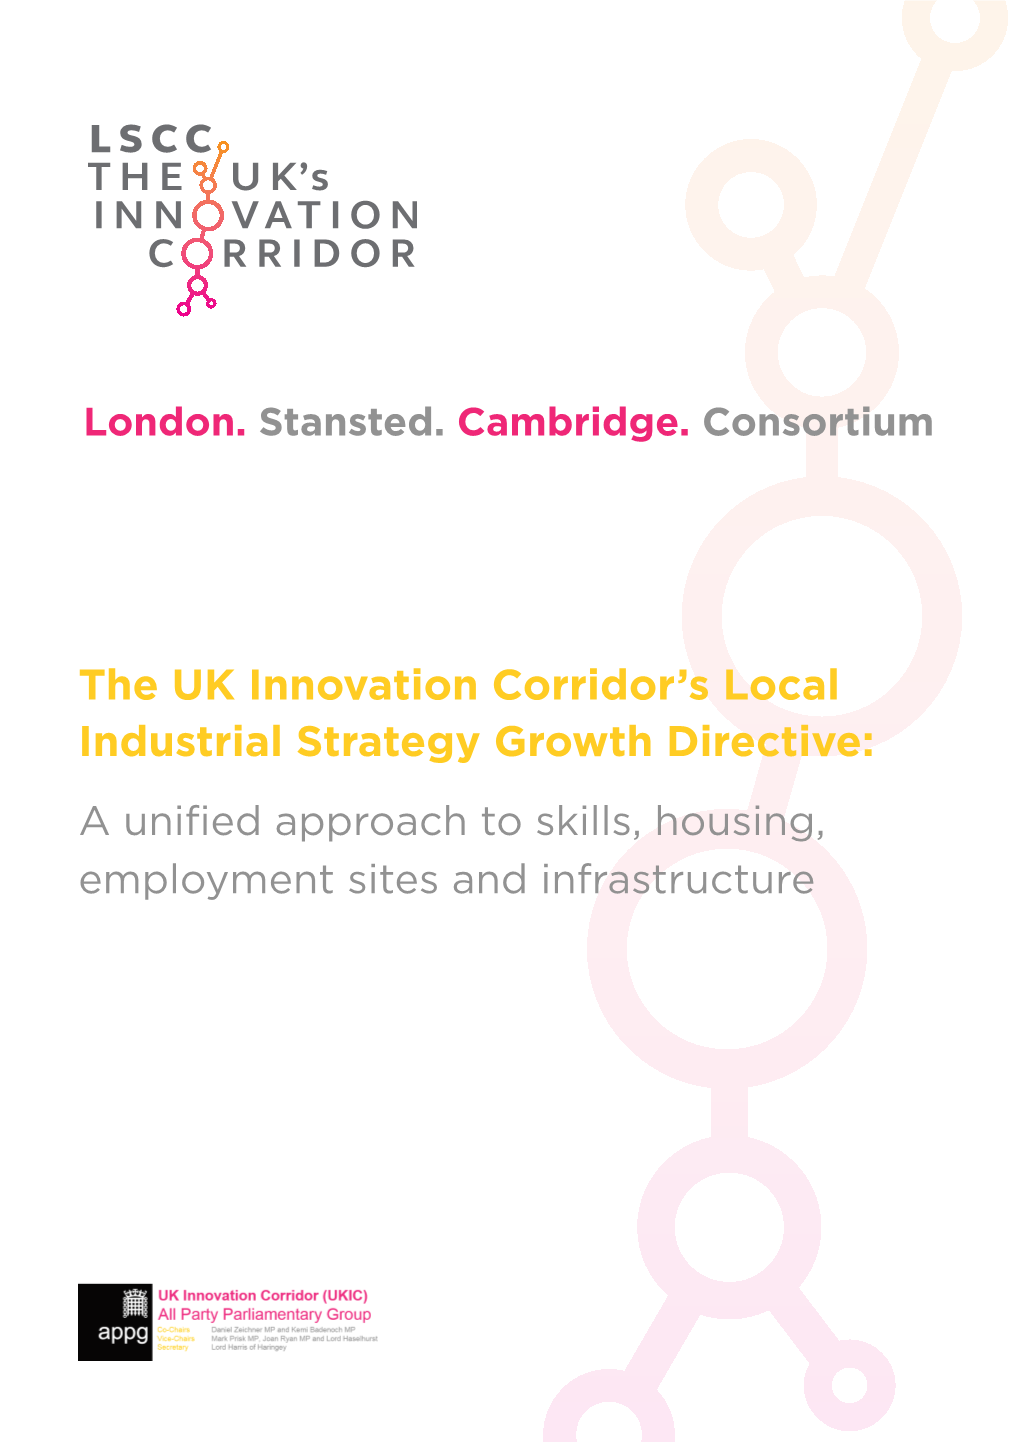 The UK Innovation Corridor's Local Industrial Strategy Growth Directive